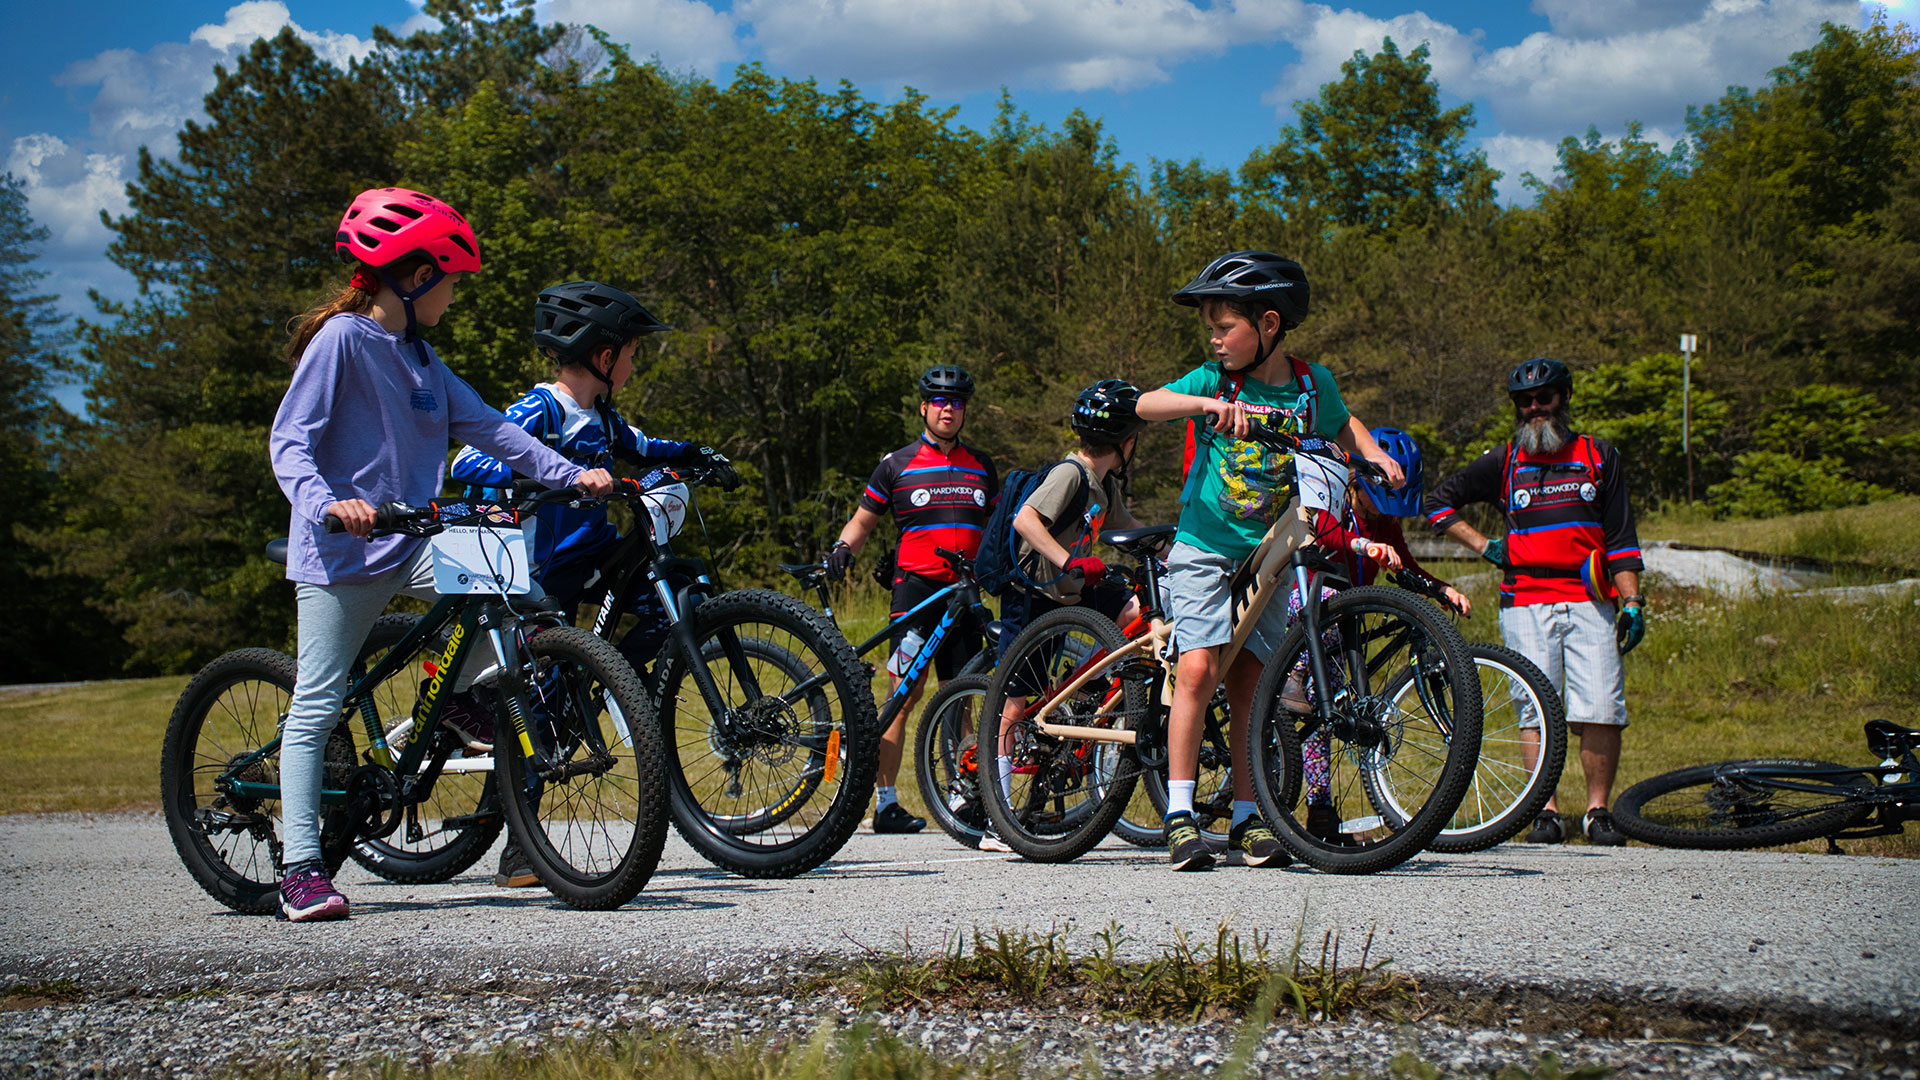 a bike instructor teaches a group of young cyclists while on a ride